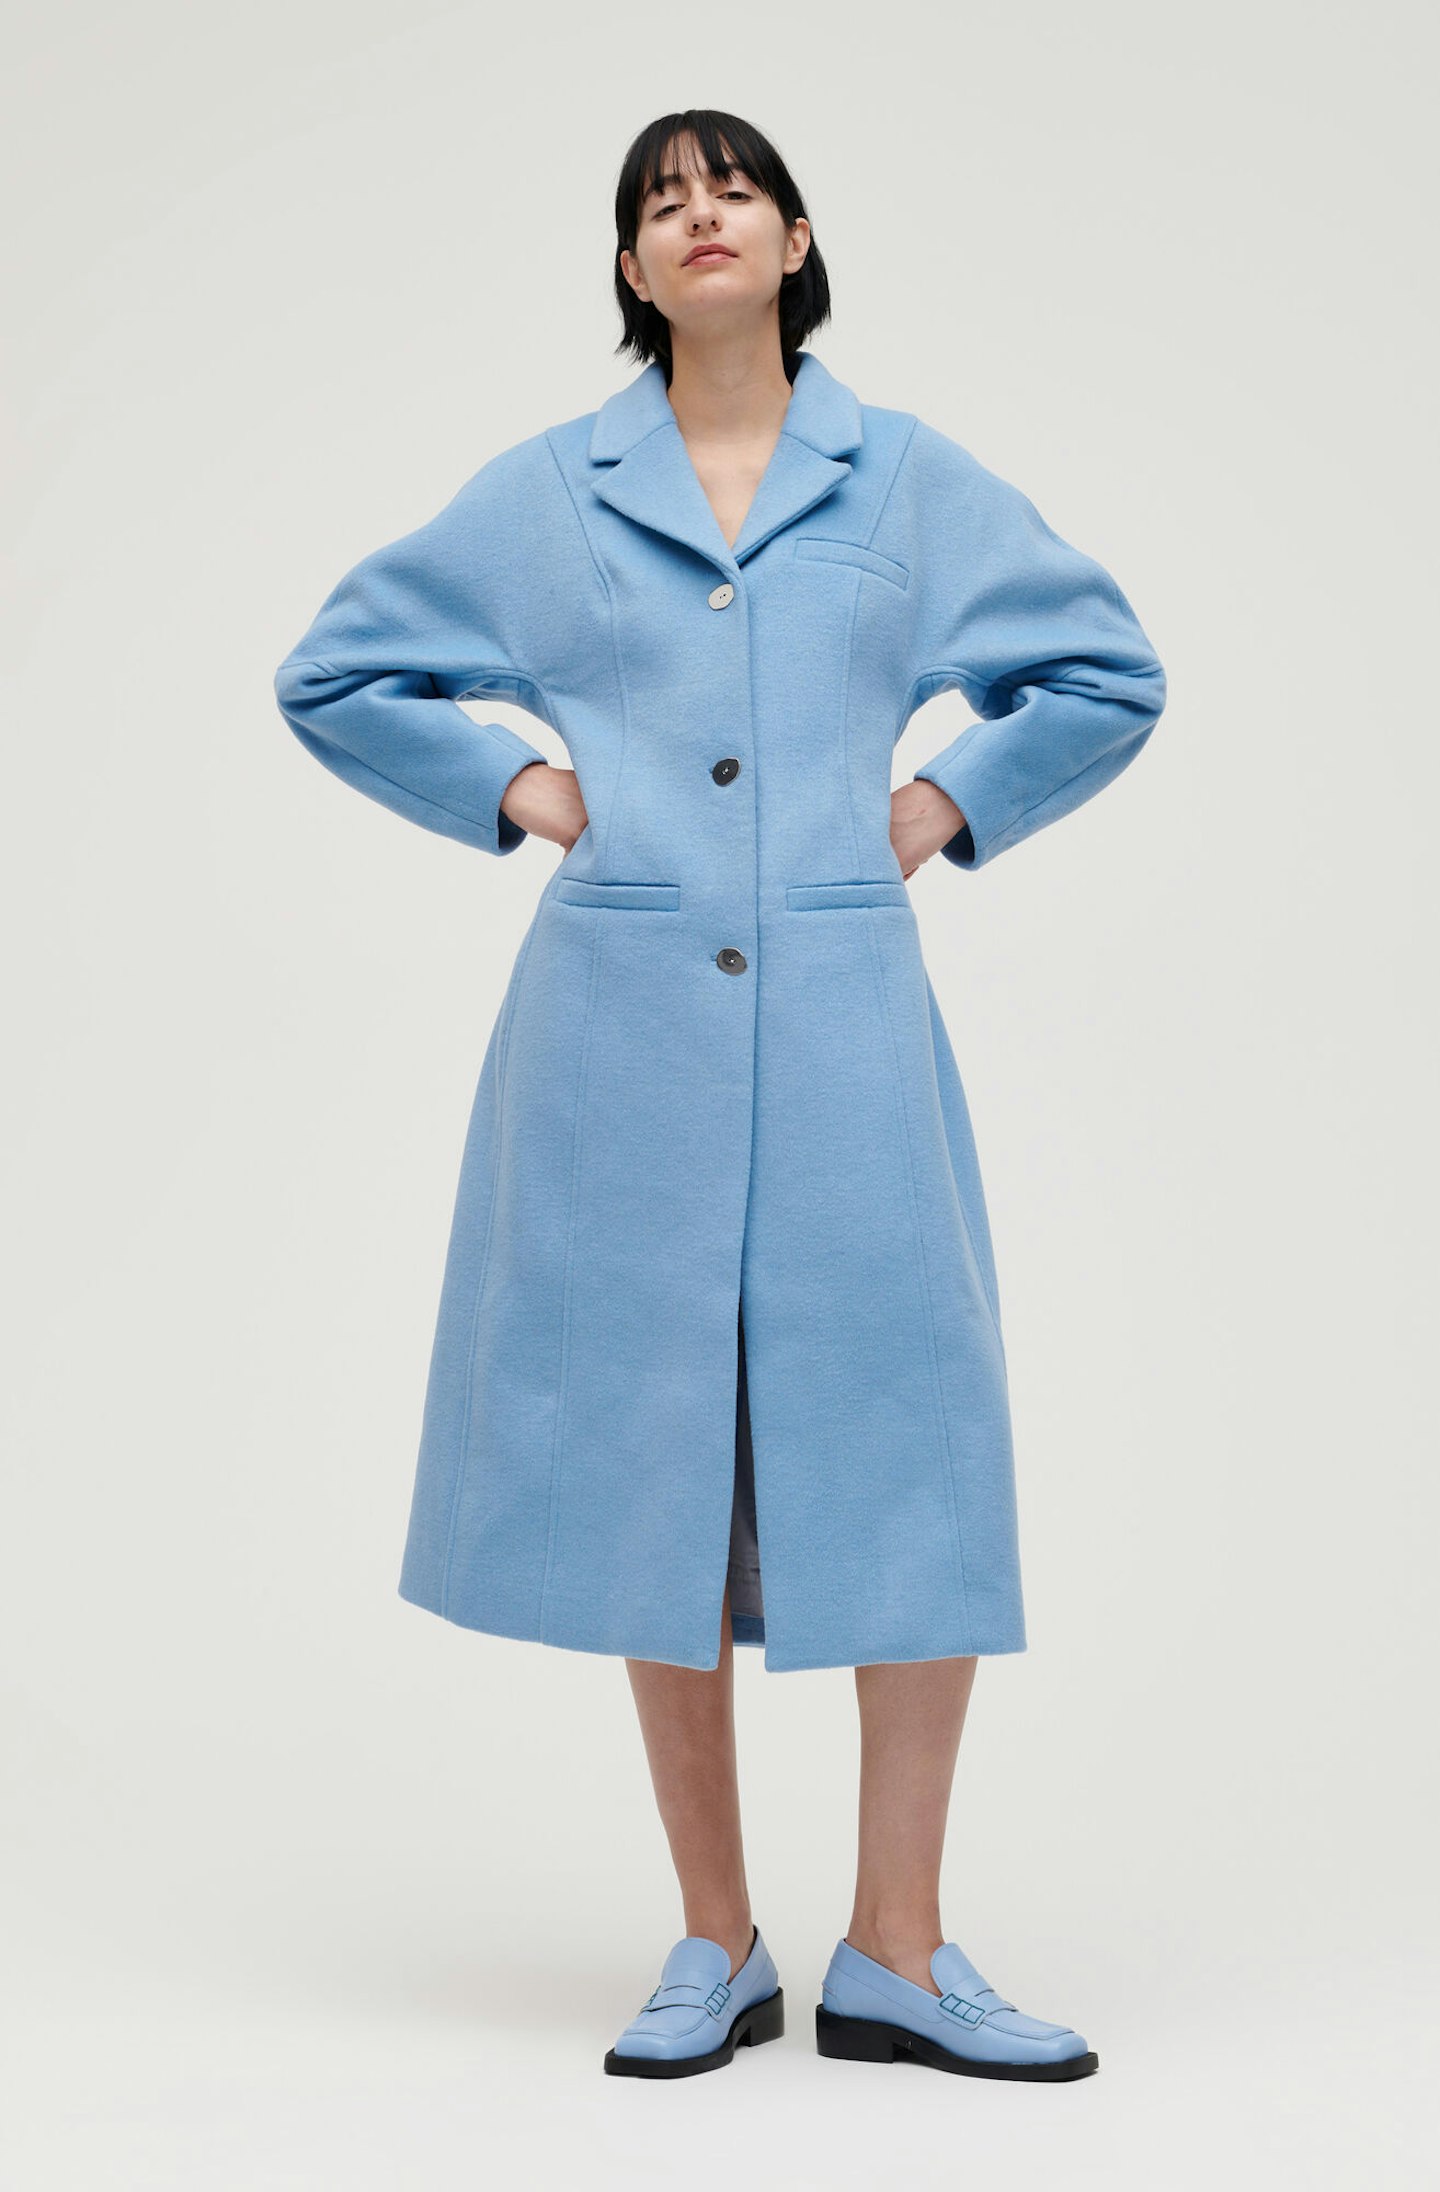 Ganni, Wool Curved Sleeve Fitted Coat, £425